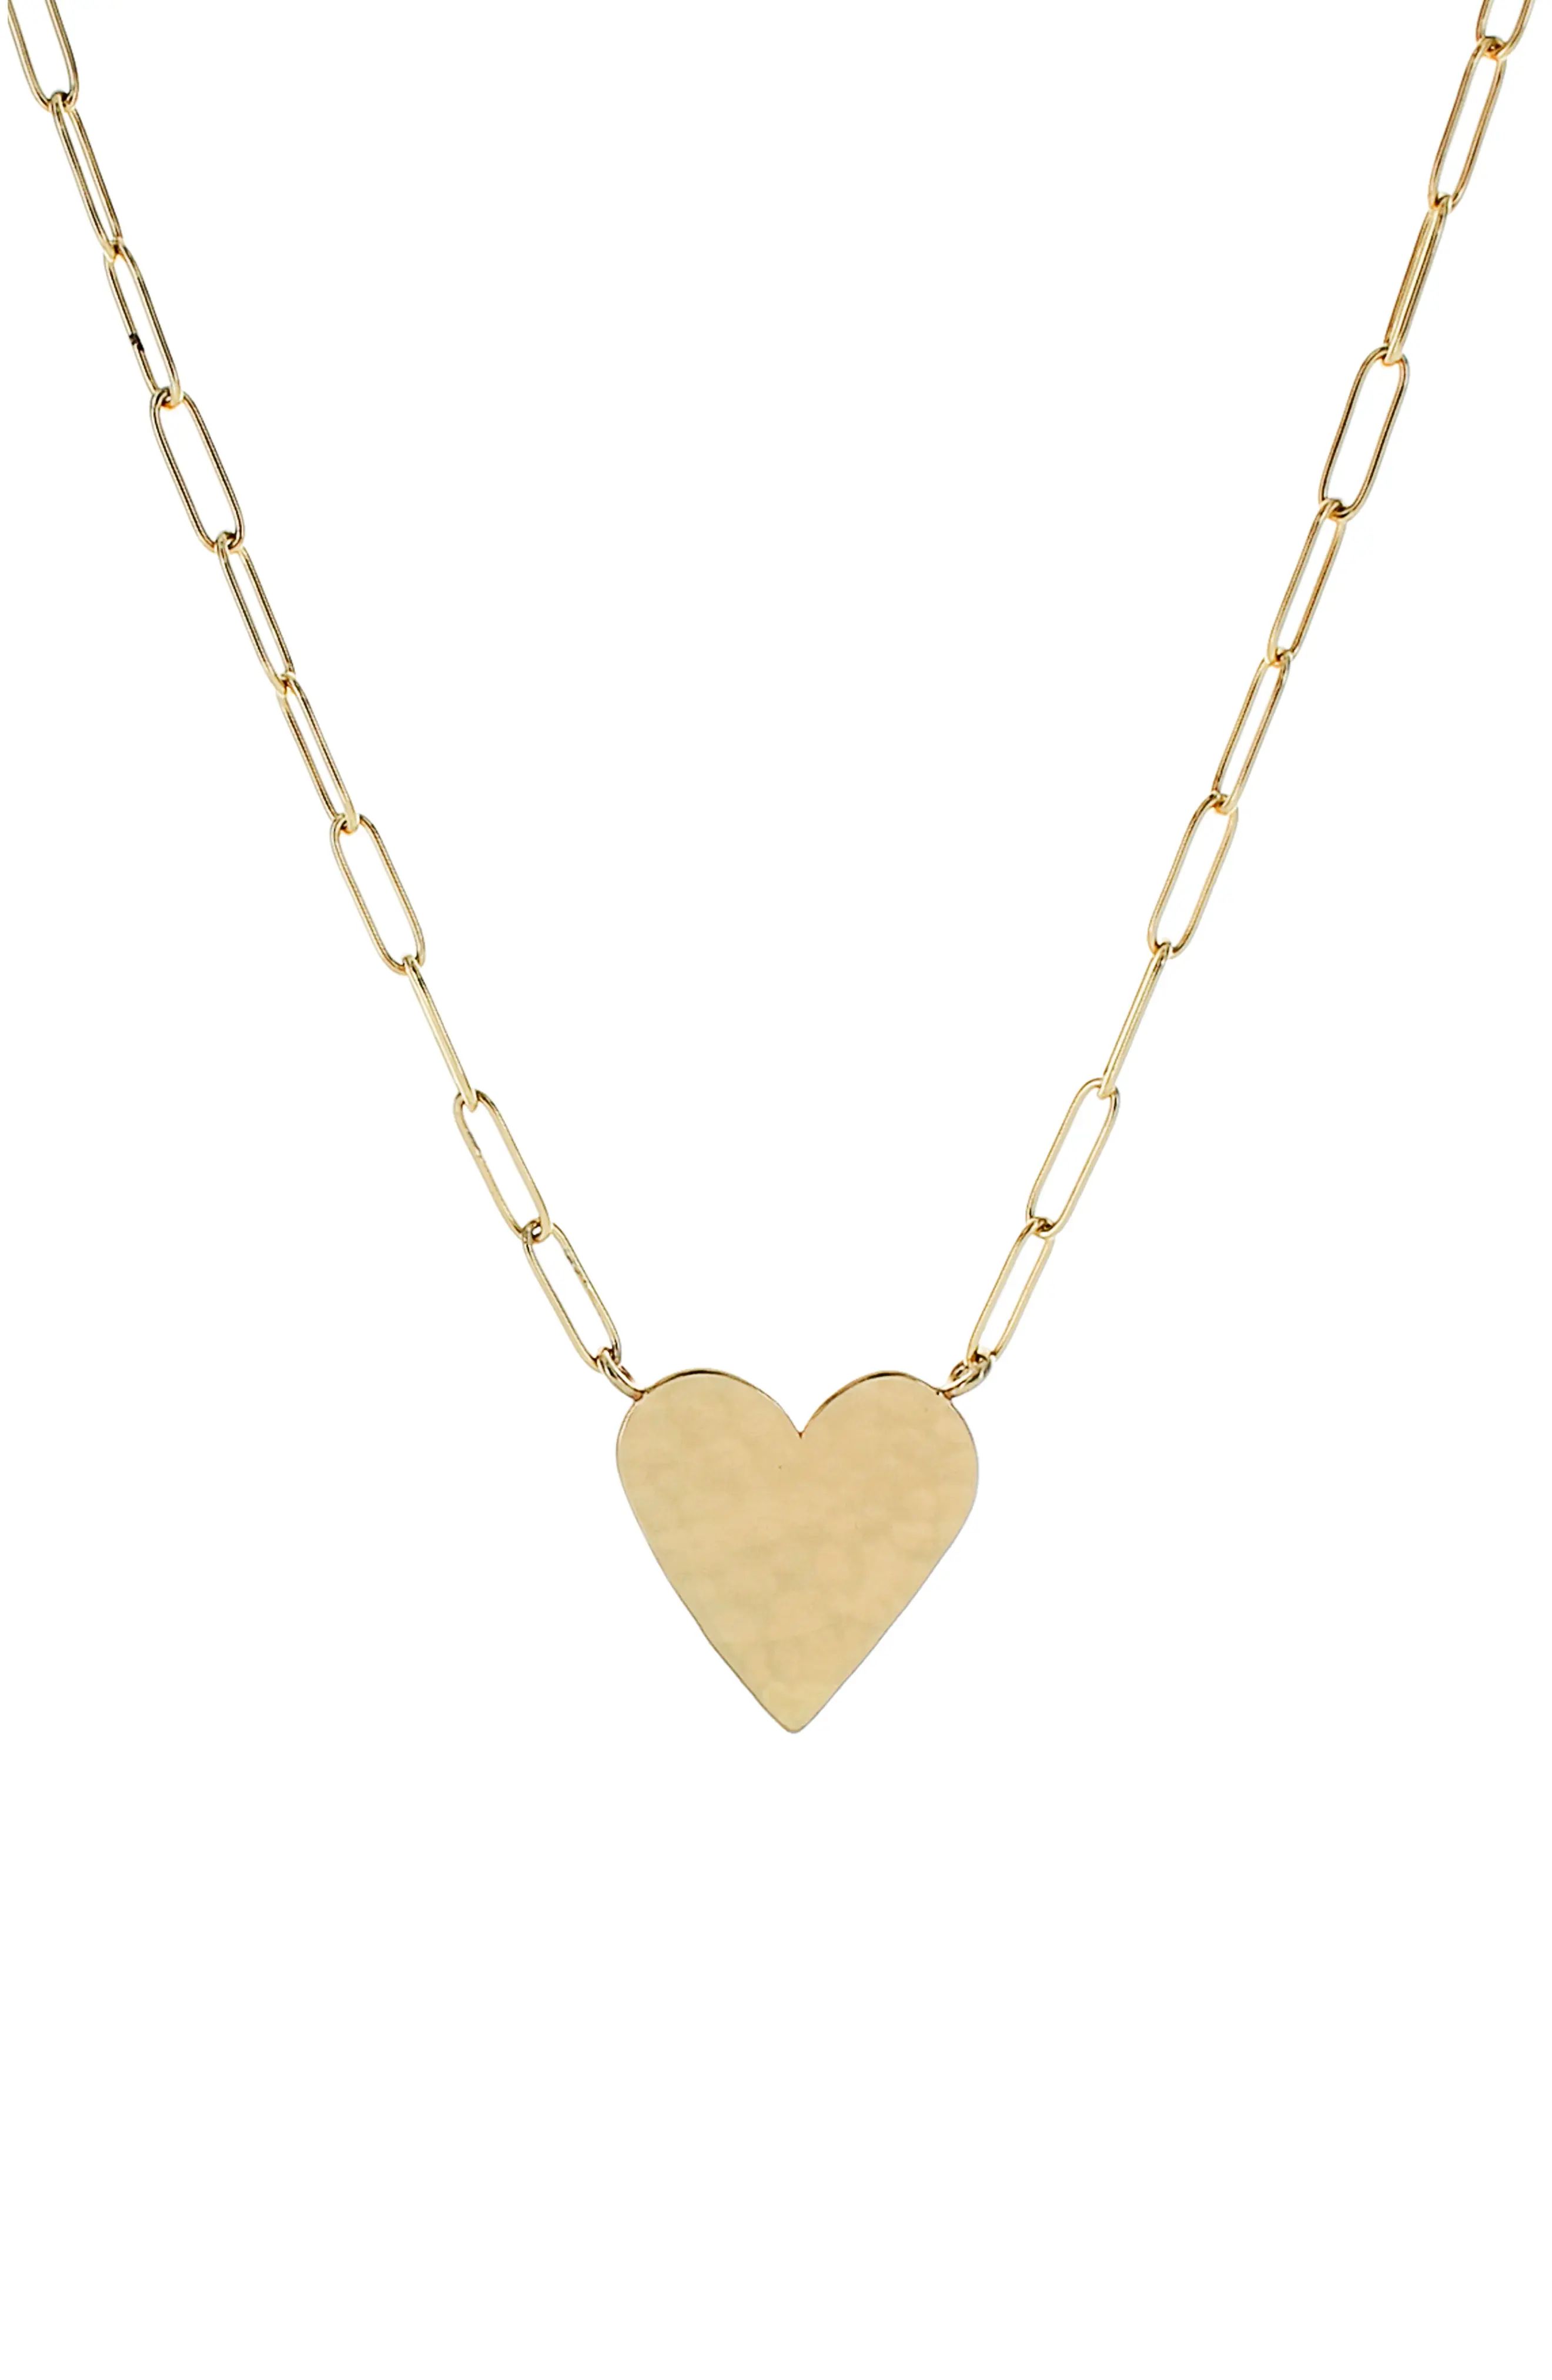 Panacea Heart Pendant Necklace in Gold at Nordstrom | Nordstrom